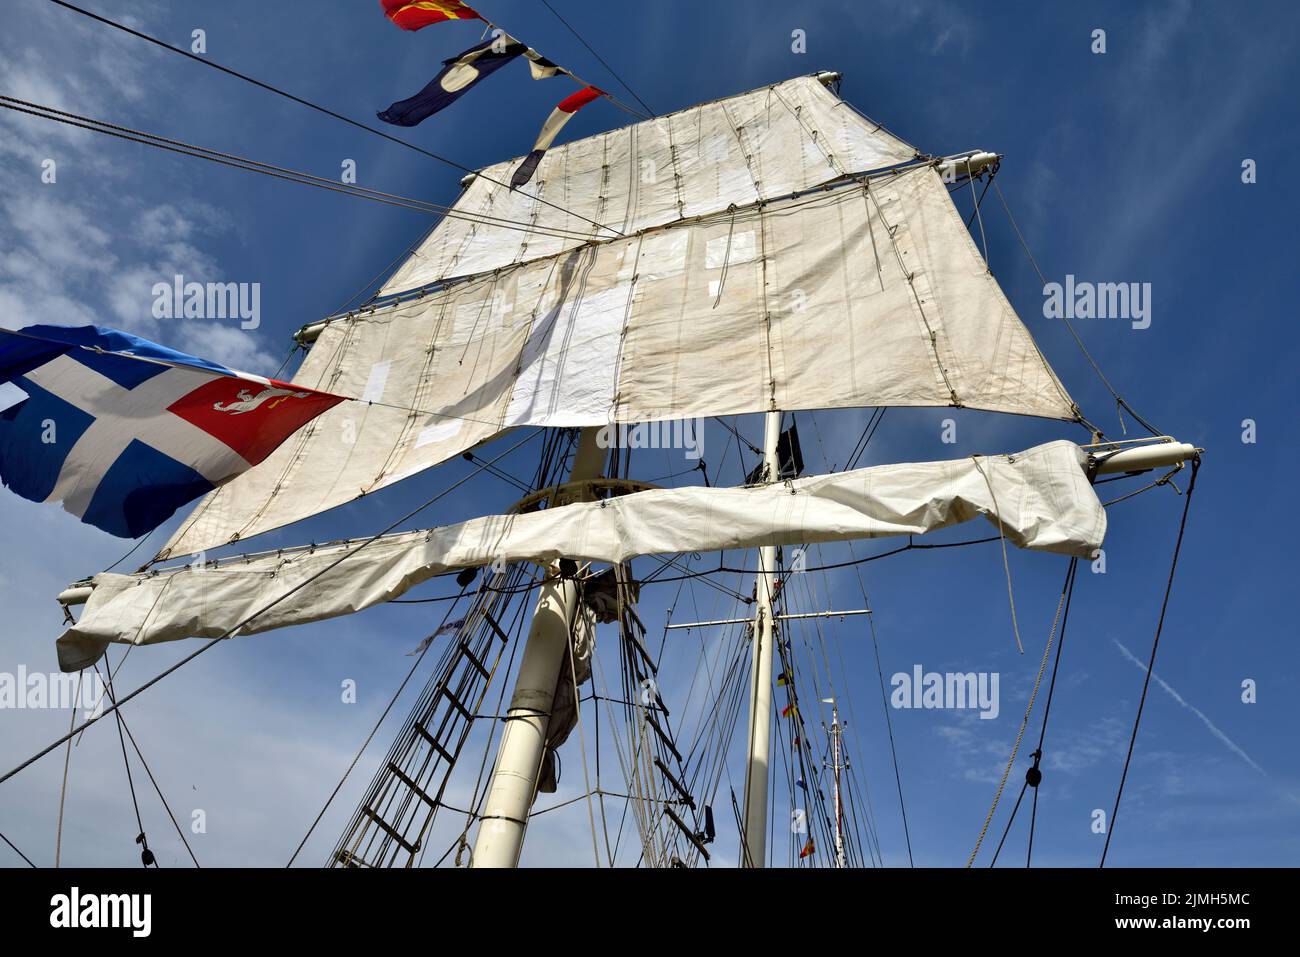 White square rig sail of tall ship Stock Photo